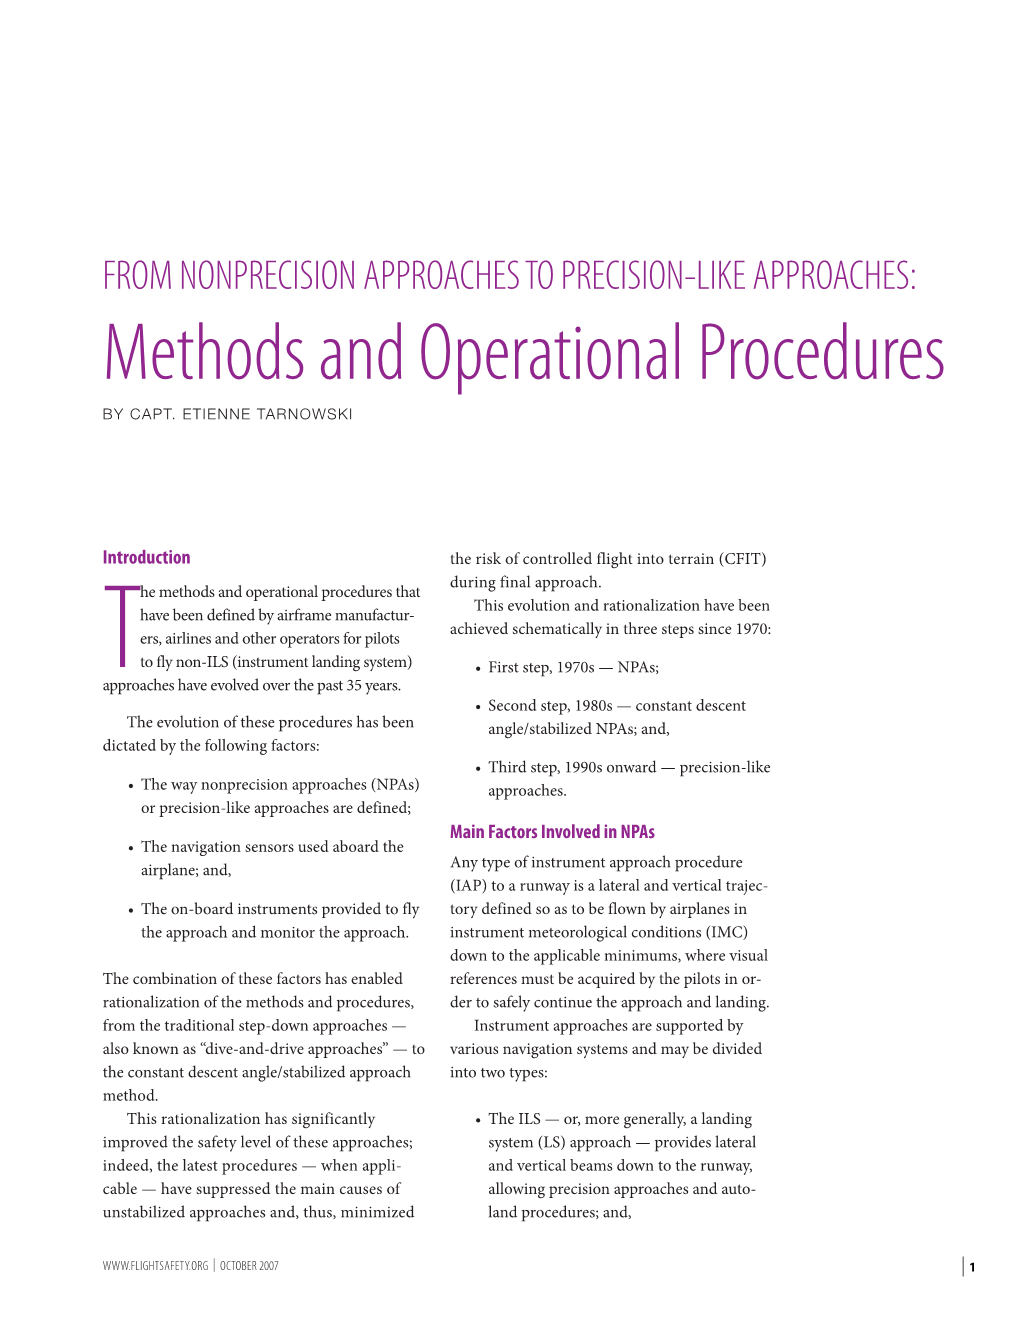 FROM NONPRECISION APPROACHES to PRECISION-LIKE APPROACHES: Methods and Operational Procedures by CAPT